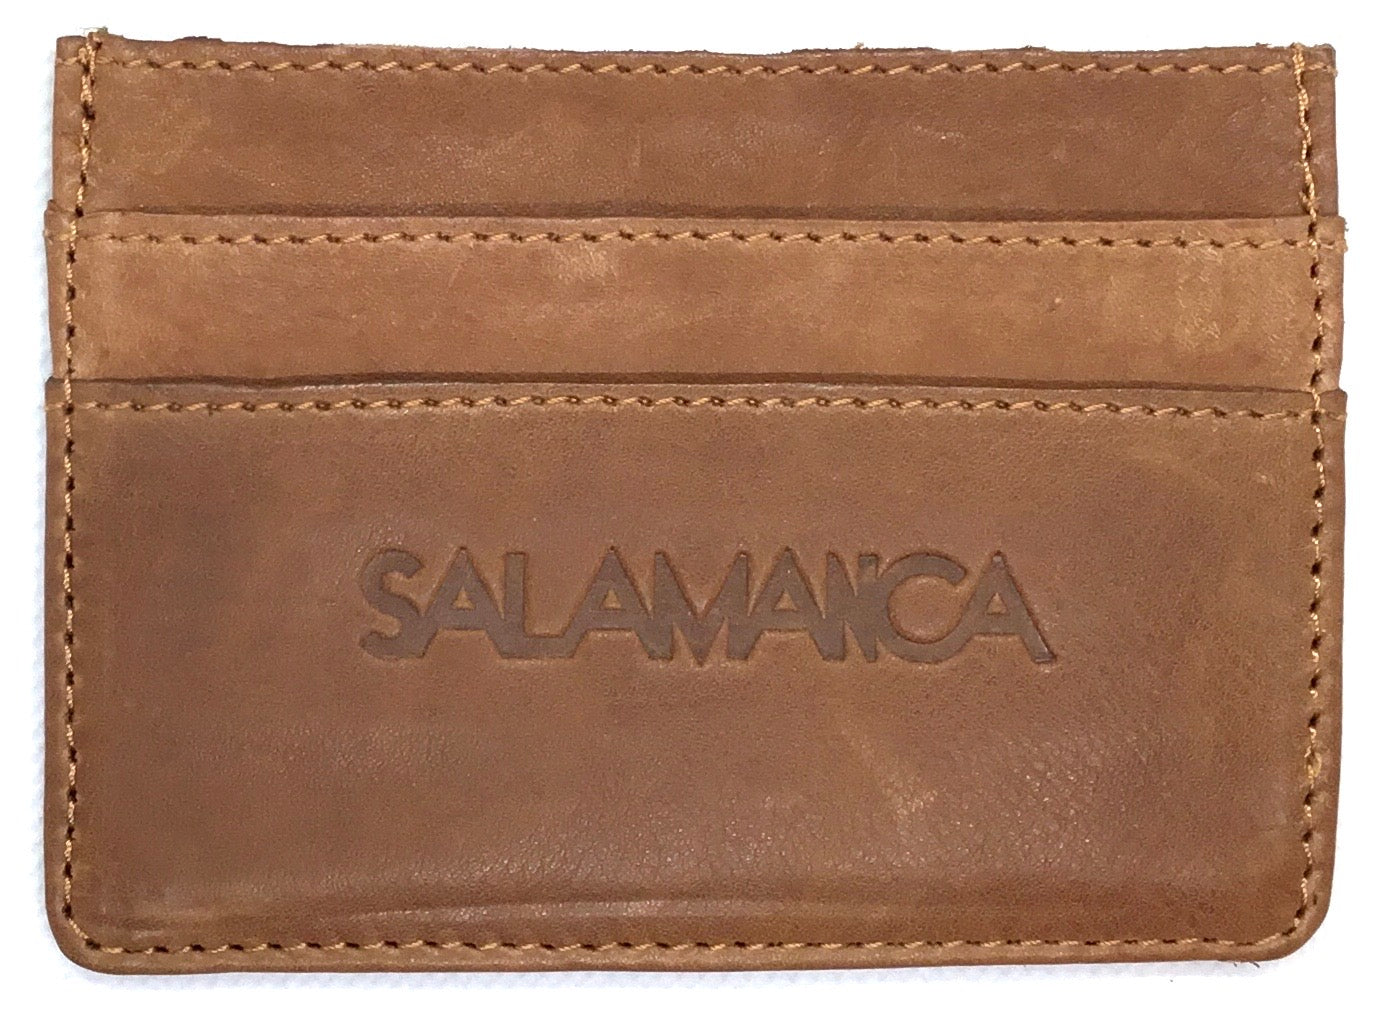 Cooper Allan Slim Credit Card Case in full grain  leather with 4 card slots and a section for notes in the middle.